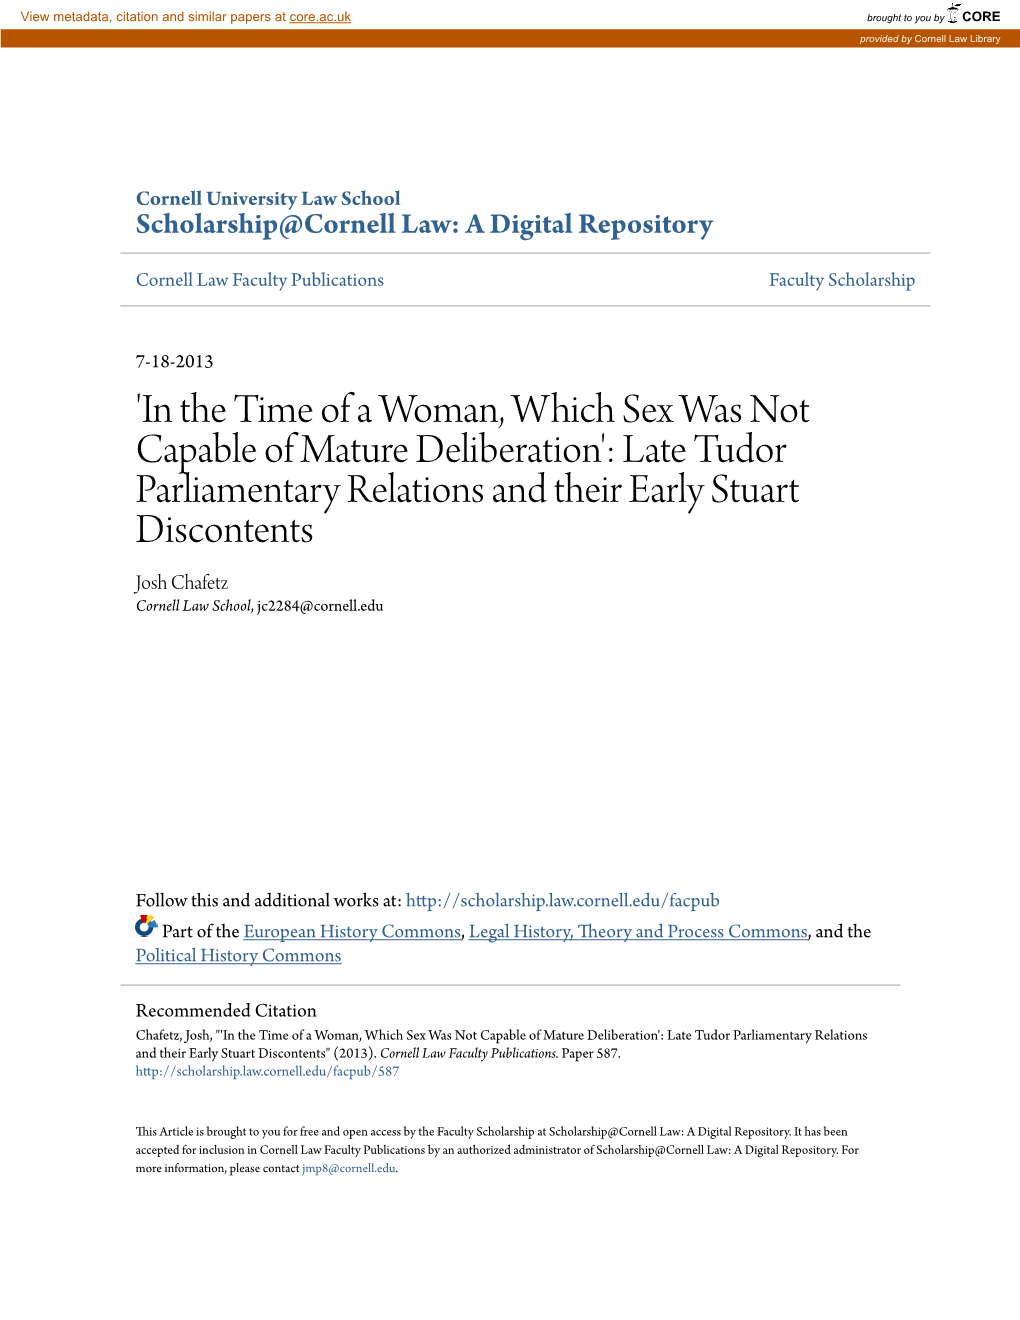 'In the Time of a Woman, Which Sex Was Not Capable of Mature Deliberation': Late Tudor Parliamentary Relations and Their